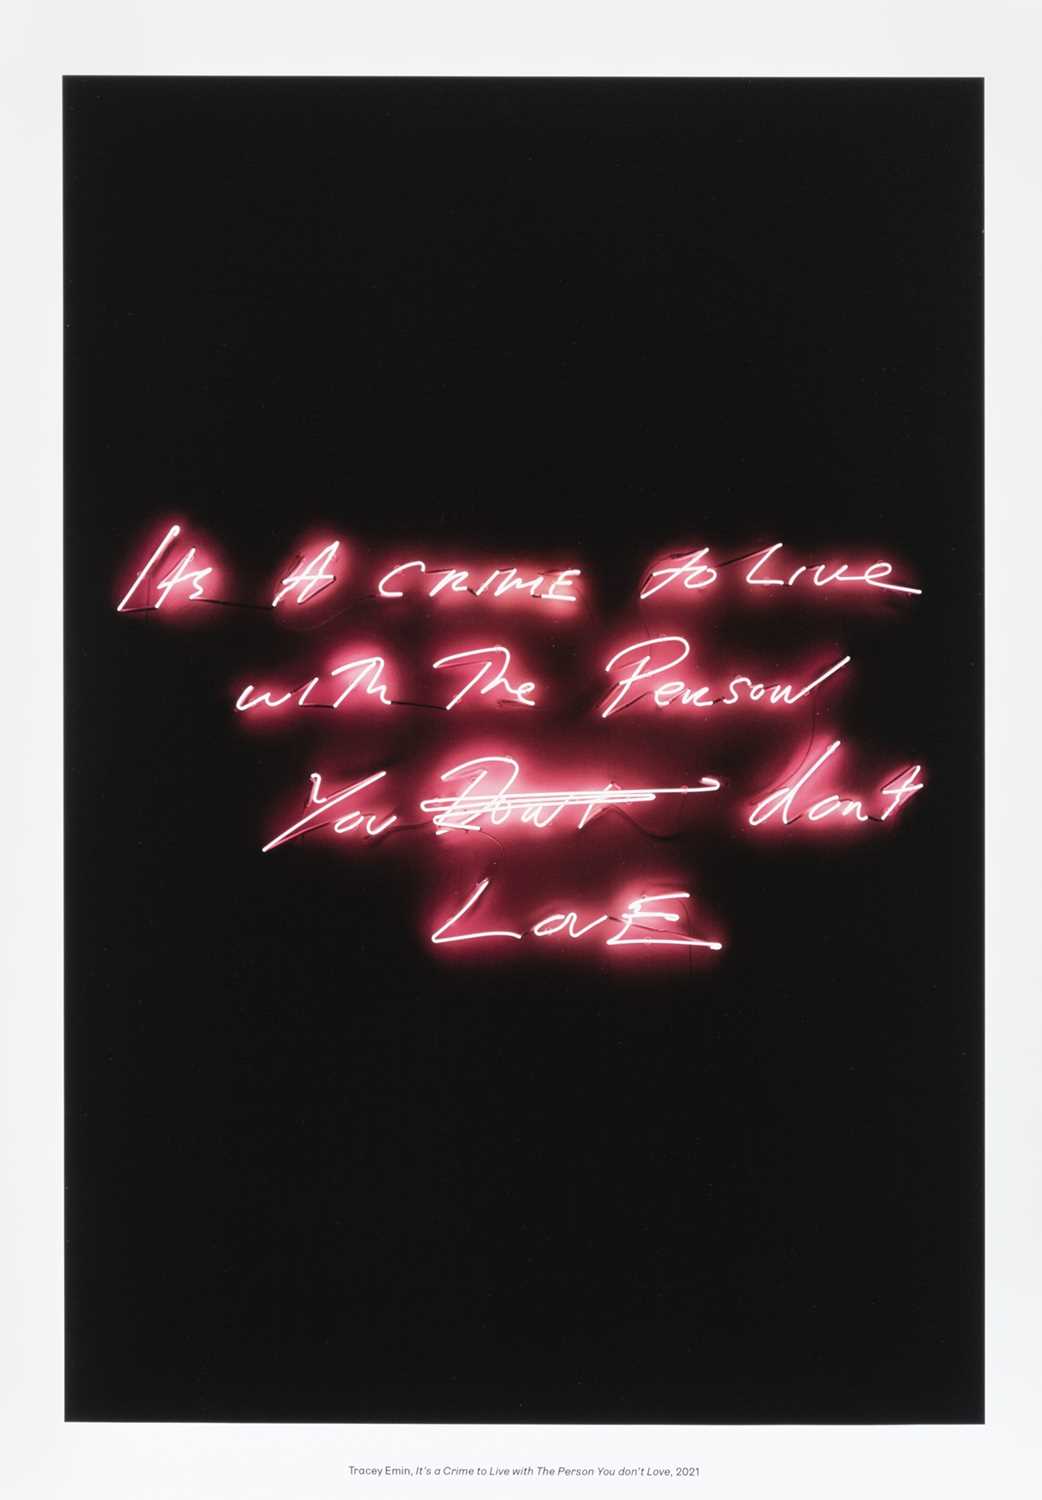 Lot 67 - Tracey Emin (British 1963-), 'It's A Crime To Live With The Person You Don't Love', 2021